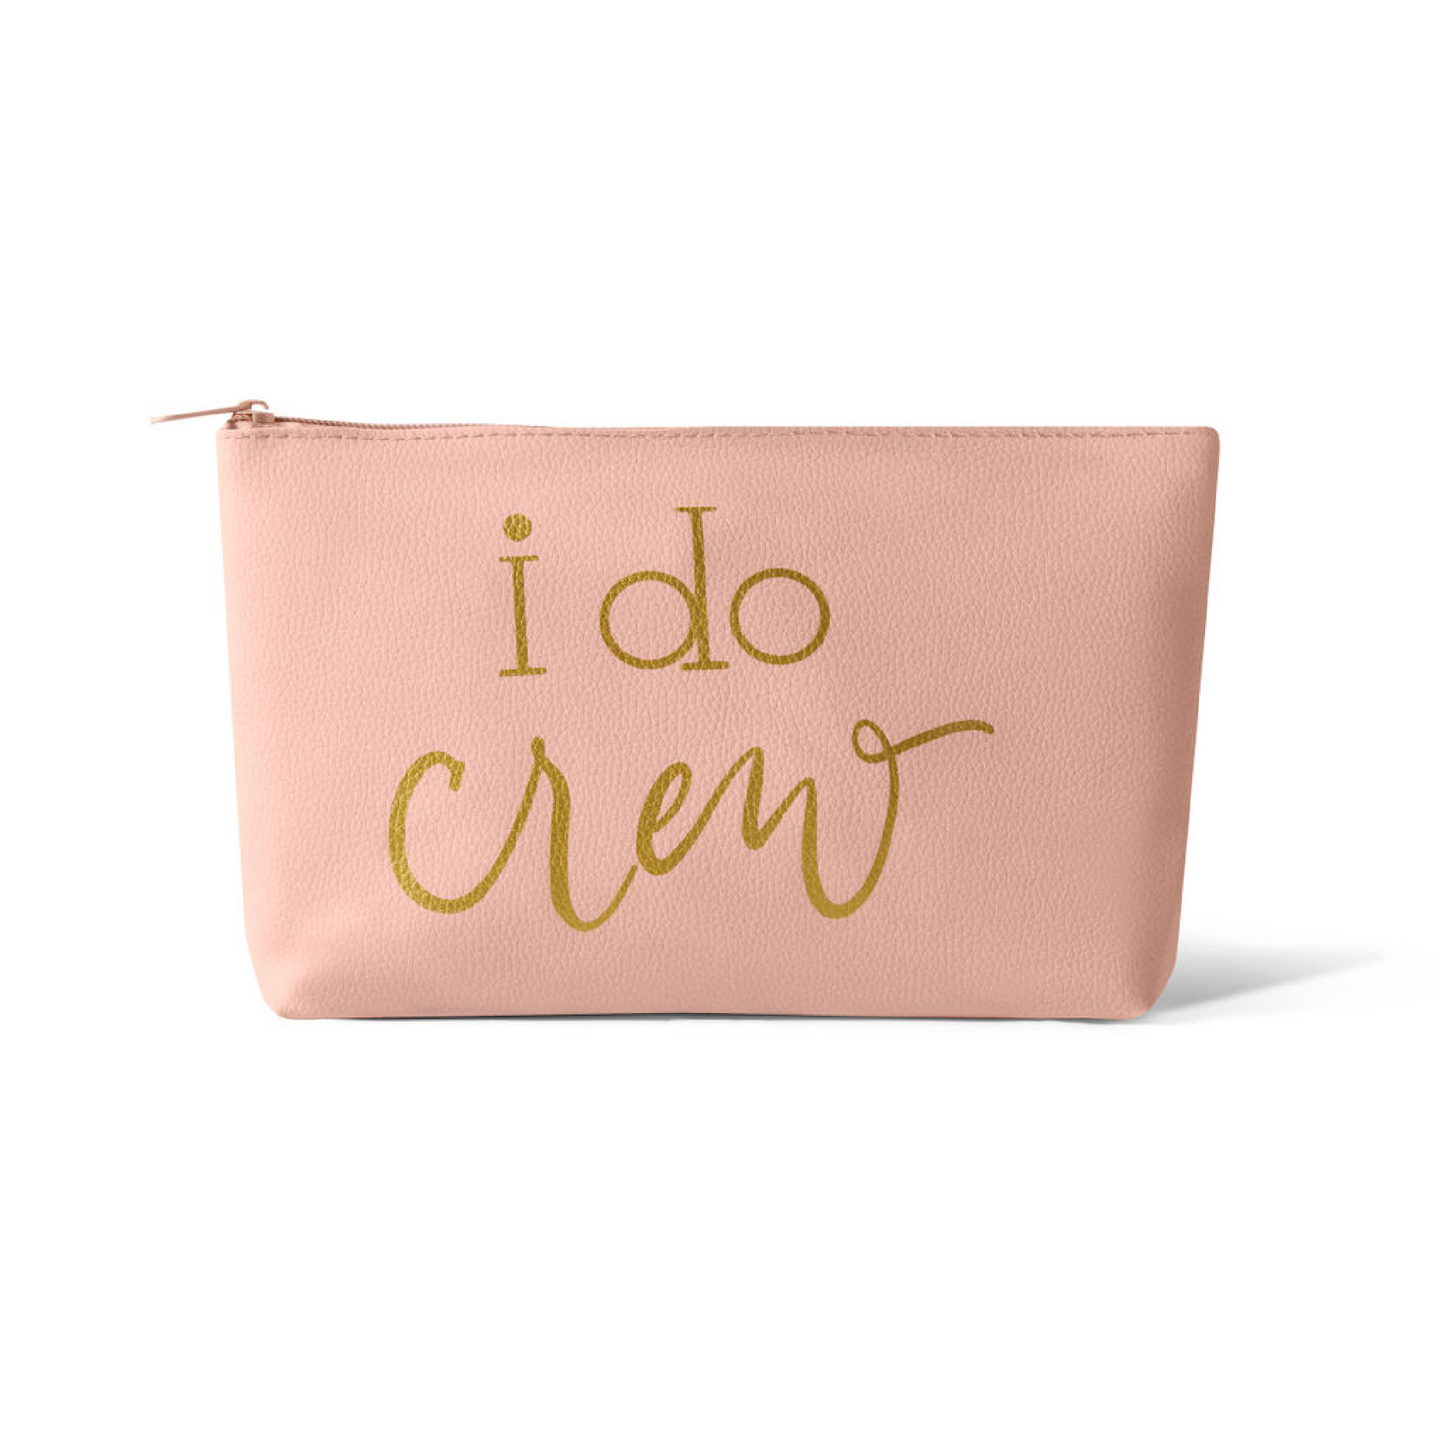 Blush Pink I Do Crew Makeup Bag in Faux Leather